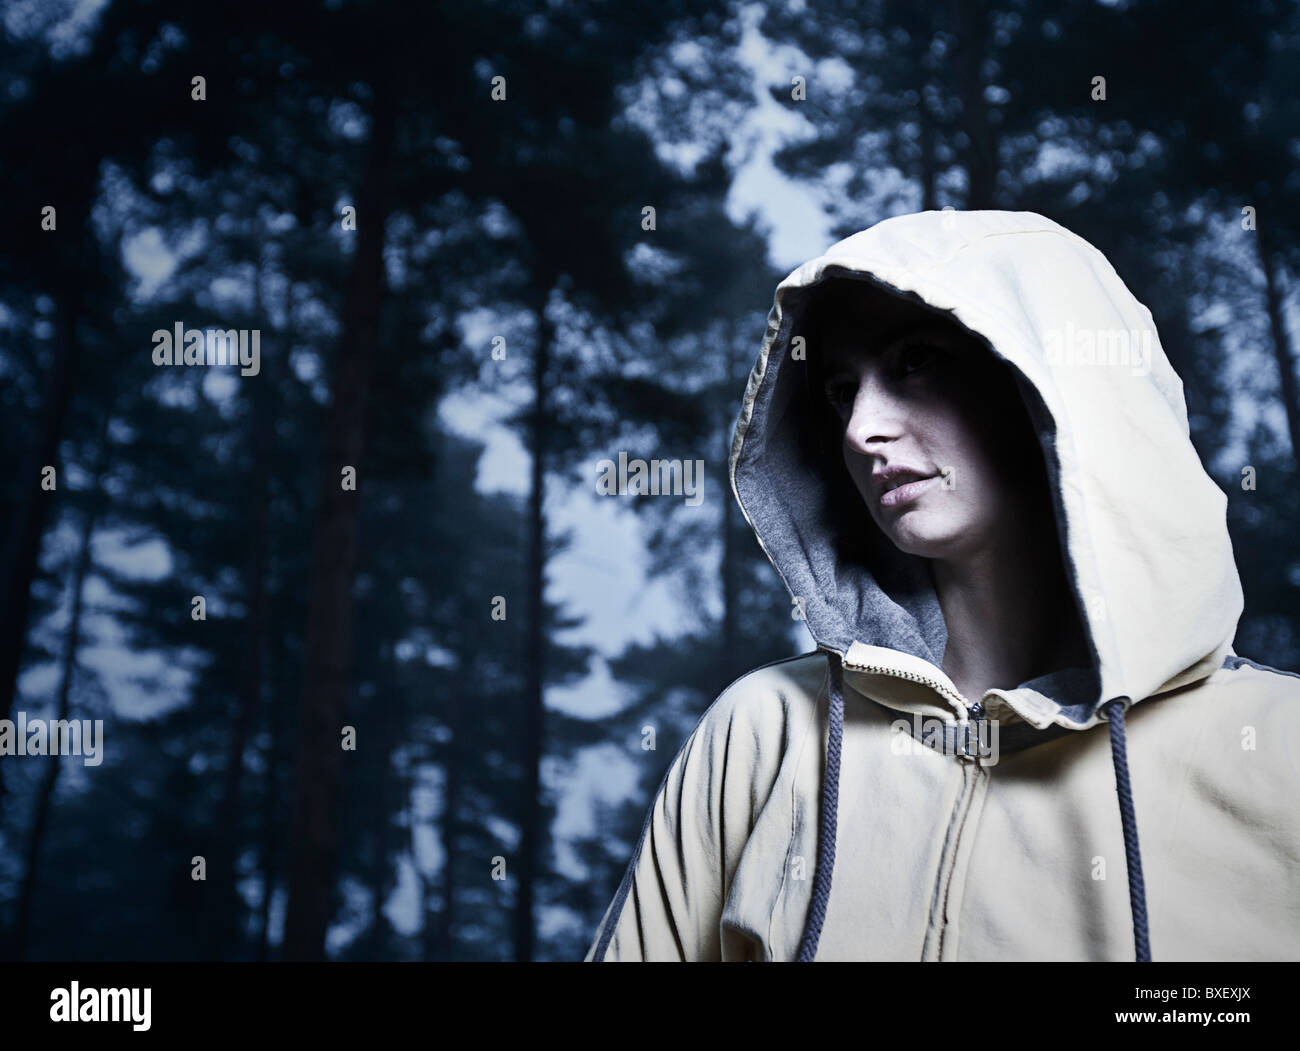 Hooded Woman in Woods Stock Photo